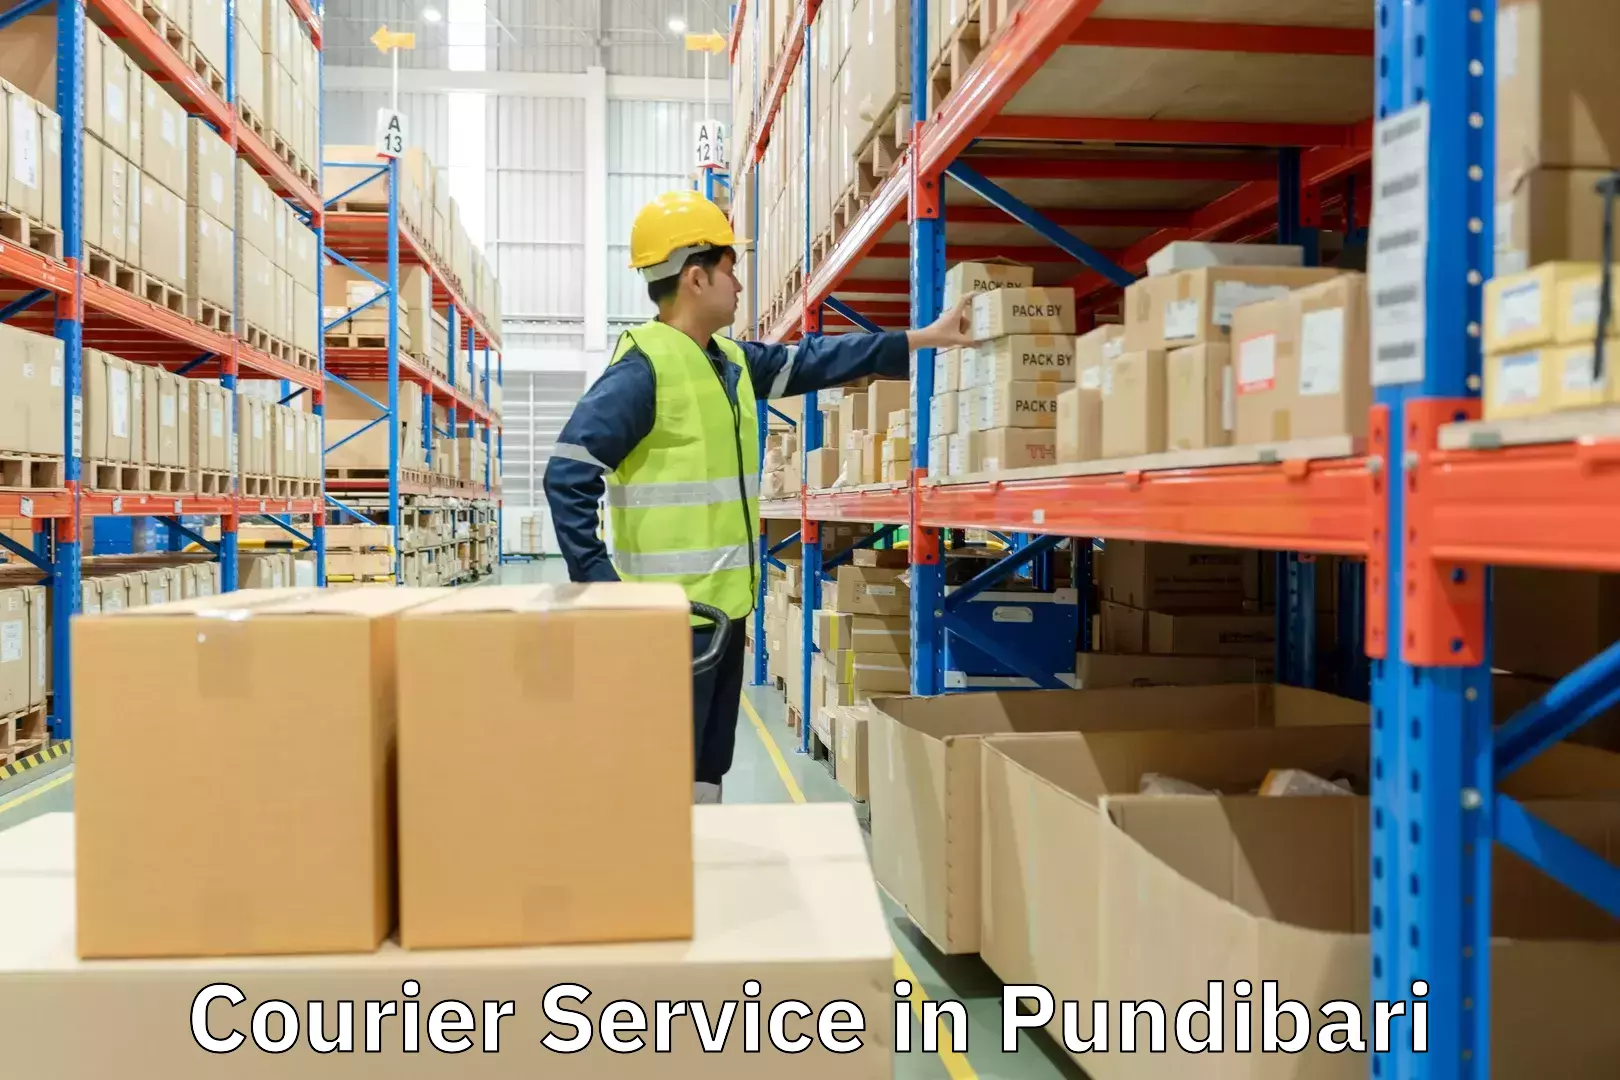 Courier service innovation in Pundibari